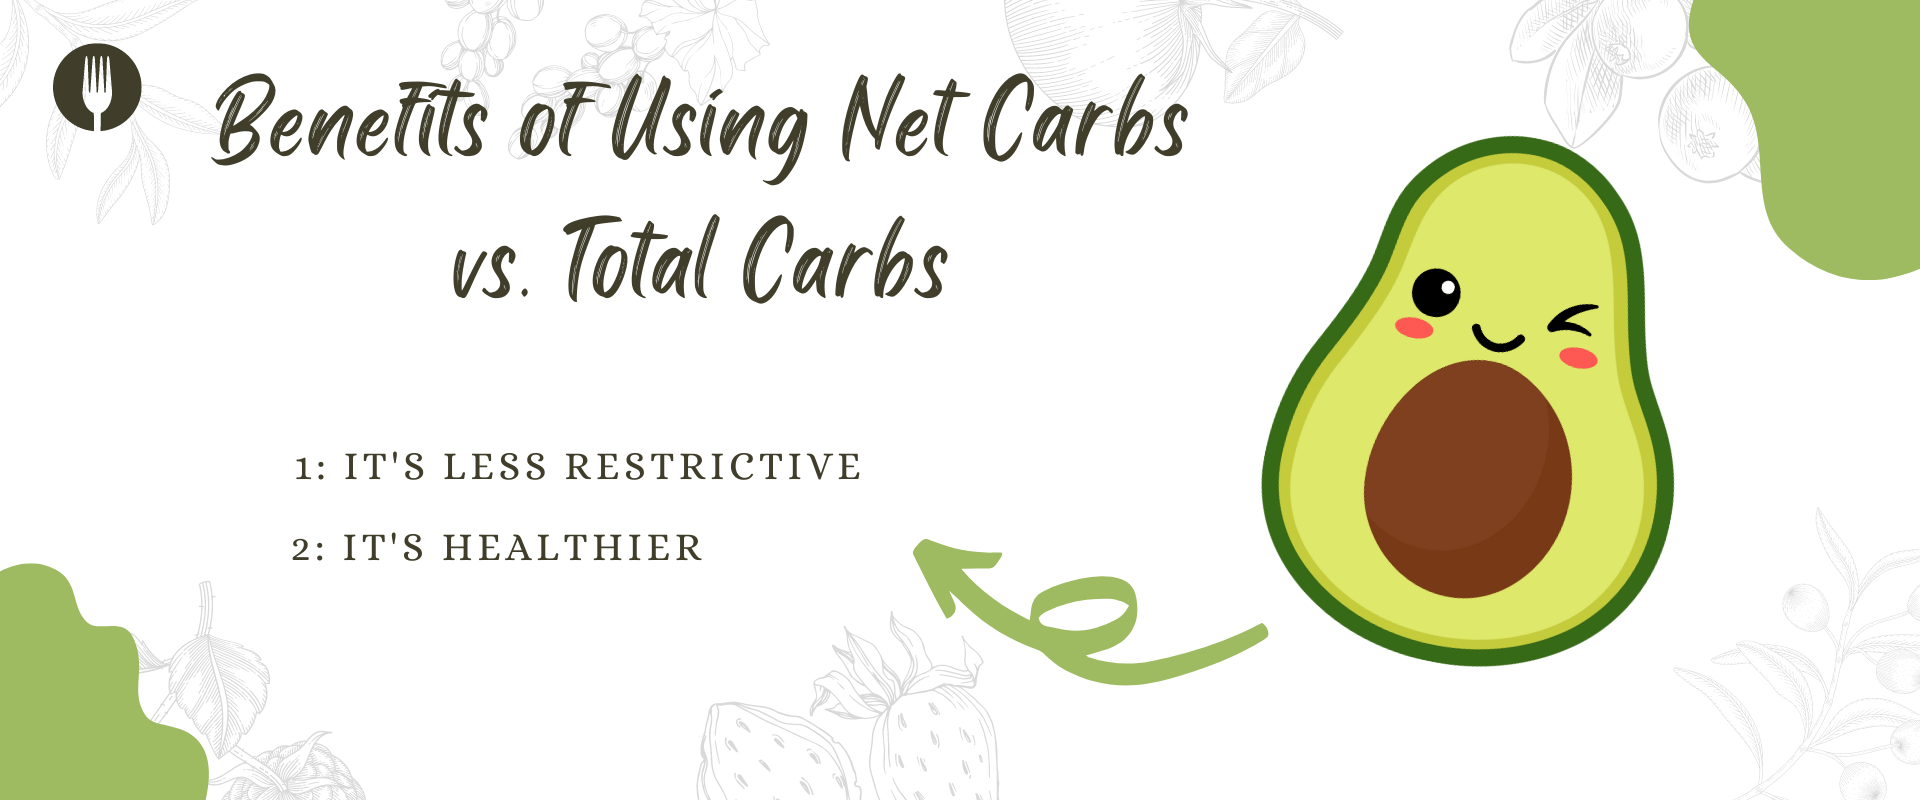 Benefits of Using Net Carbs vs. Total Carbs